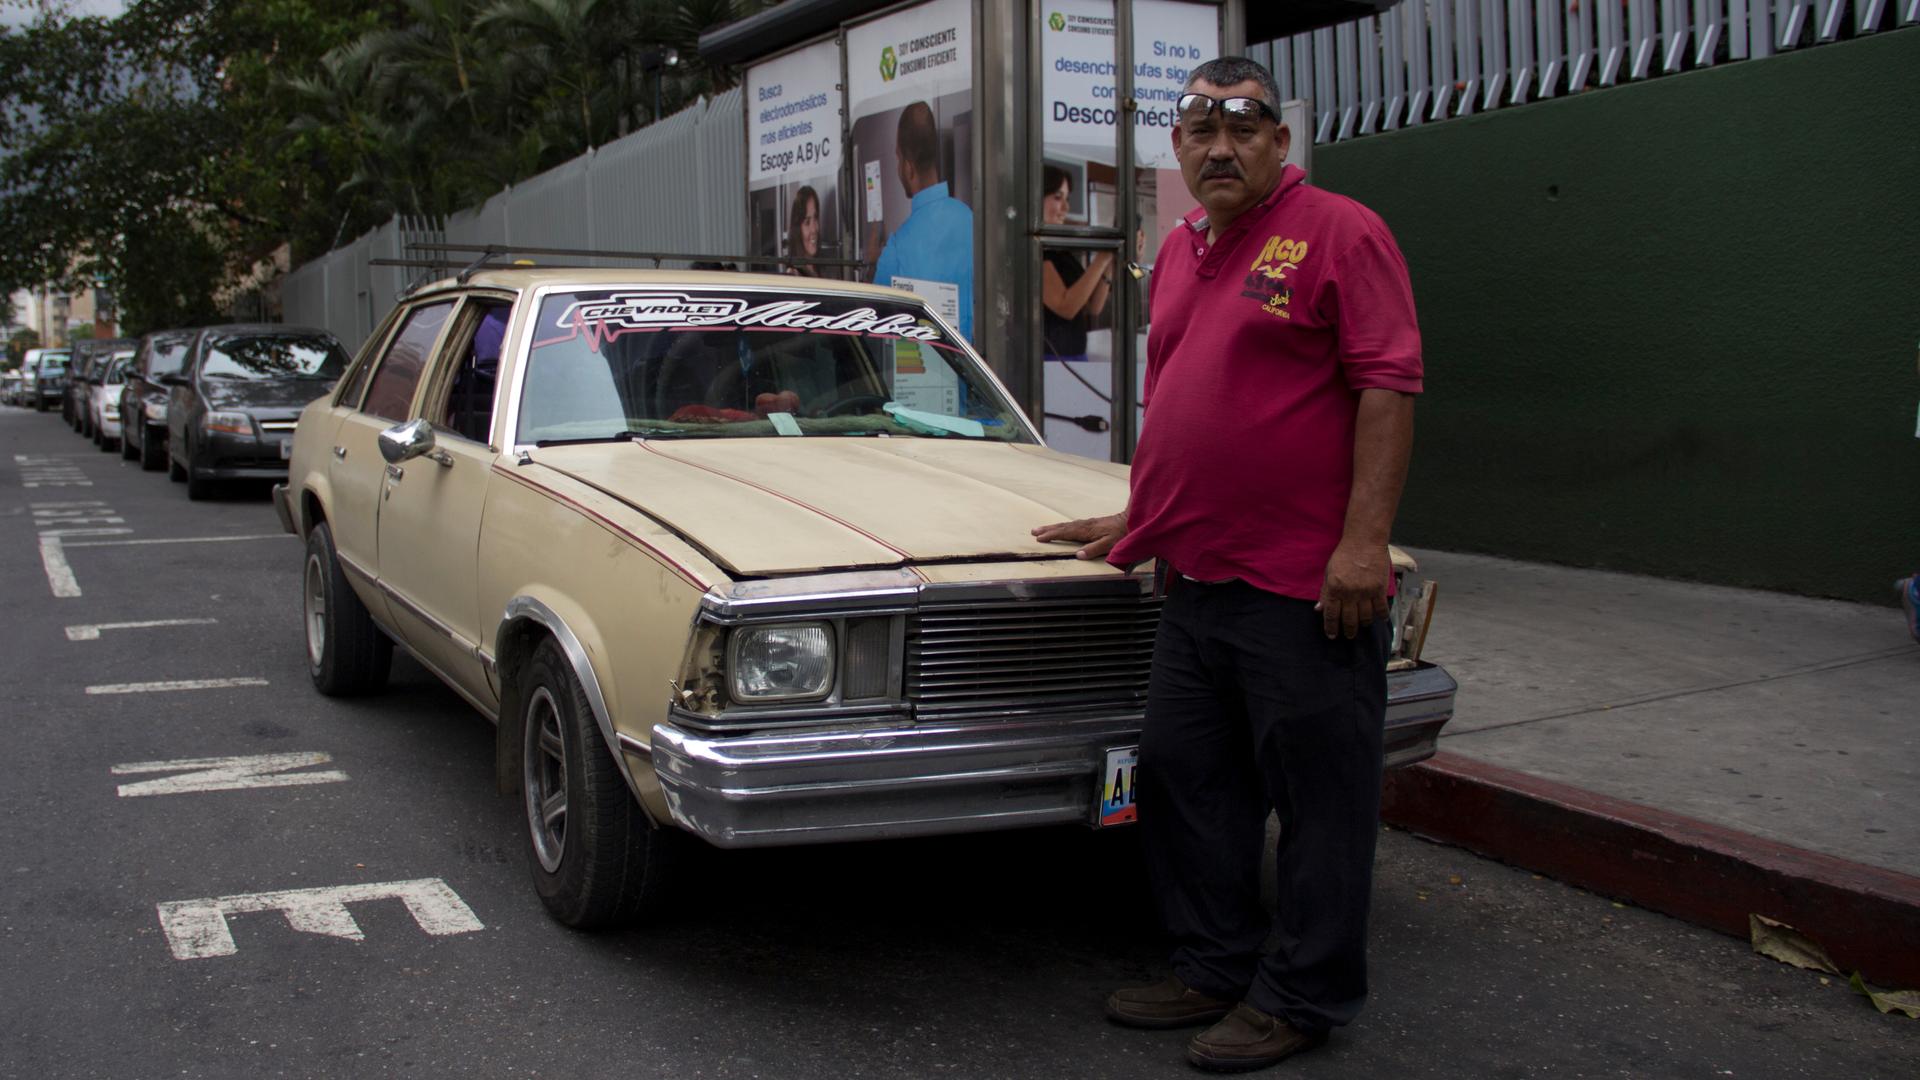 William Rivas drives his own Chevy Malibu as cab. Gas prices are so low in Venezuela that it costs him less than $1 to fill up the tank.